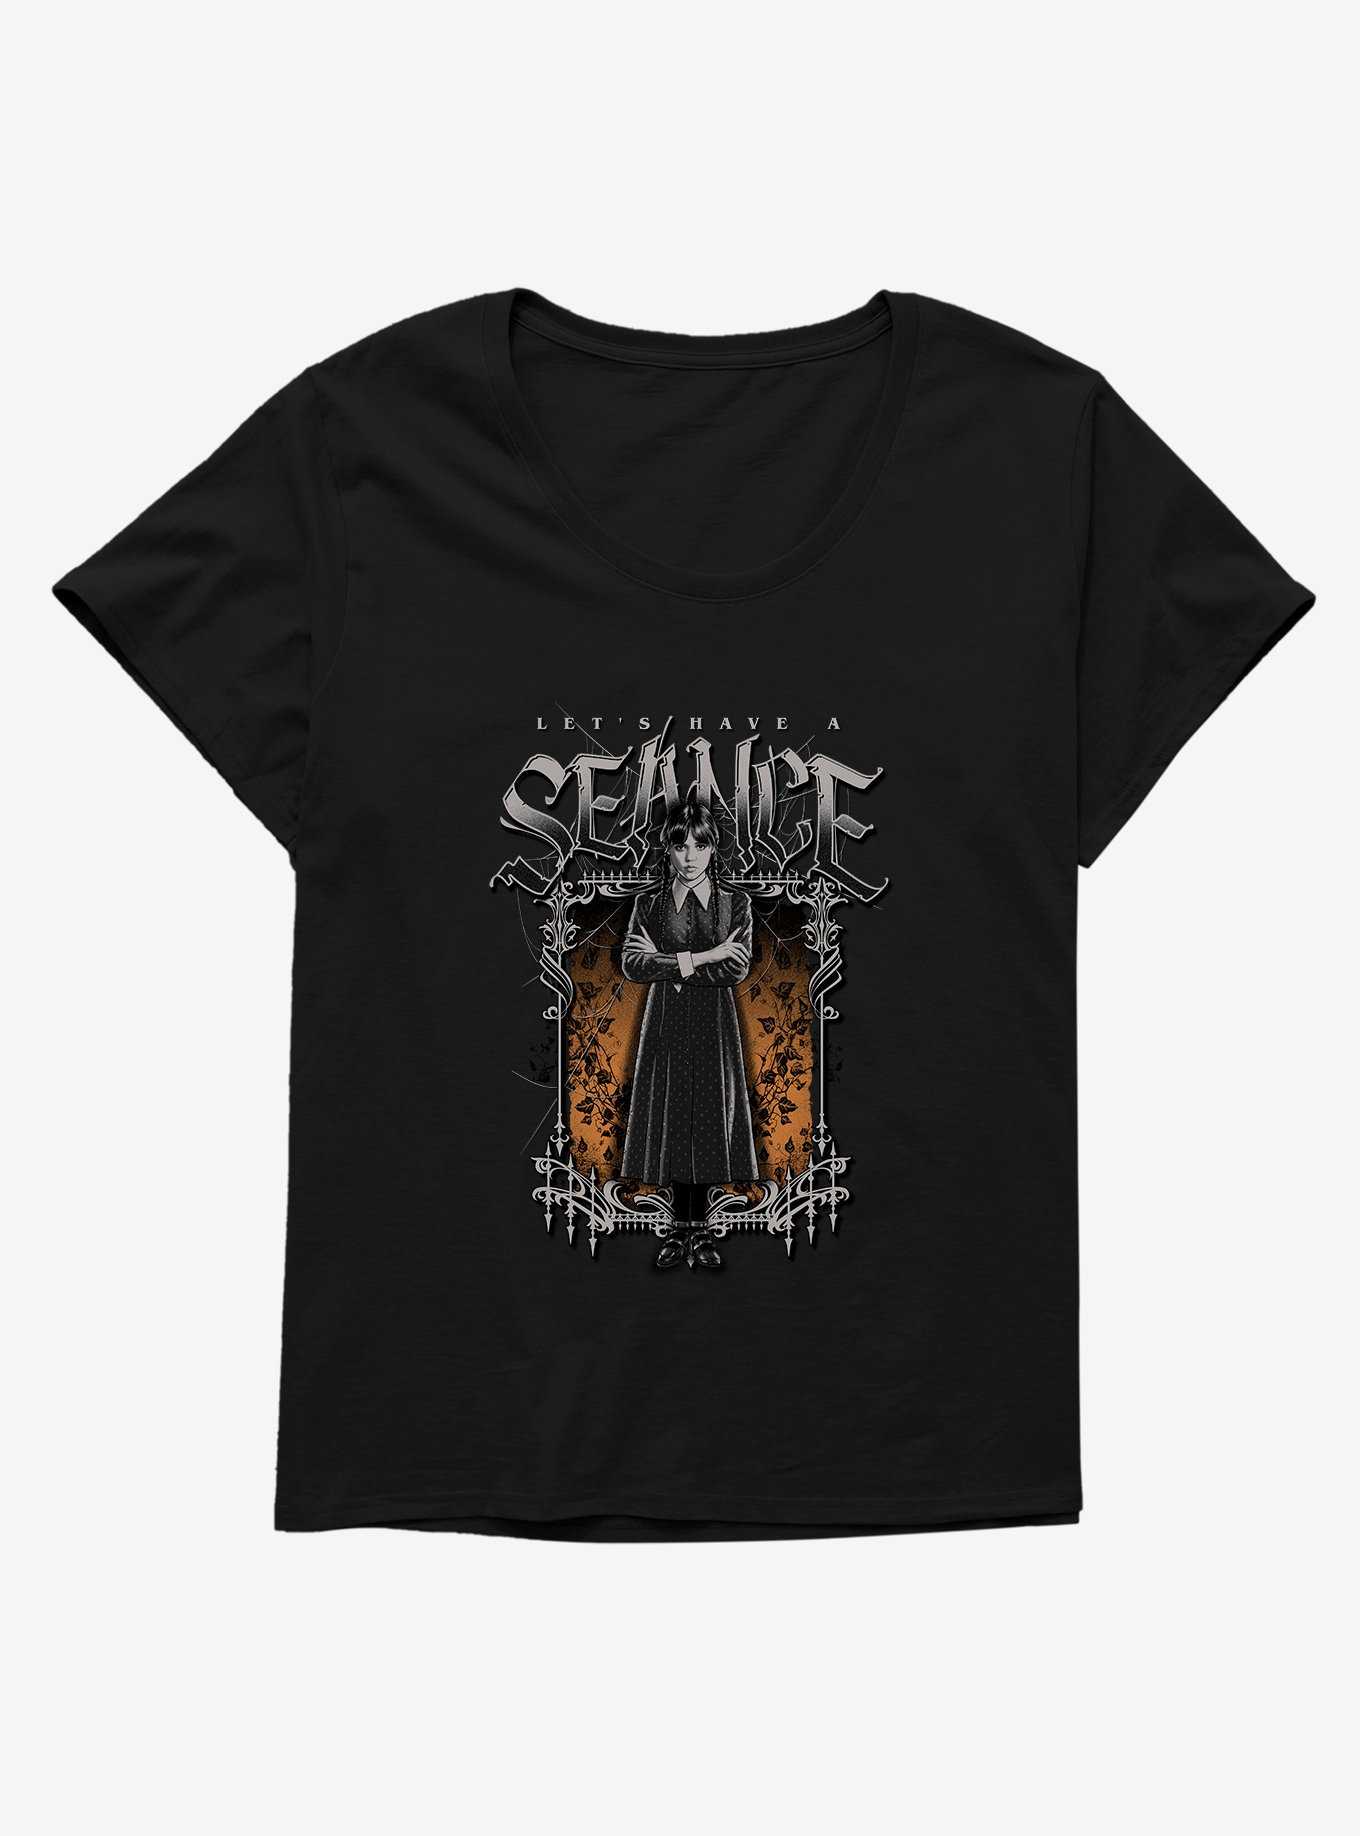 Wednesday Let's Have A Seance Girls T-Shirt Plus Size, , hi-res